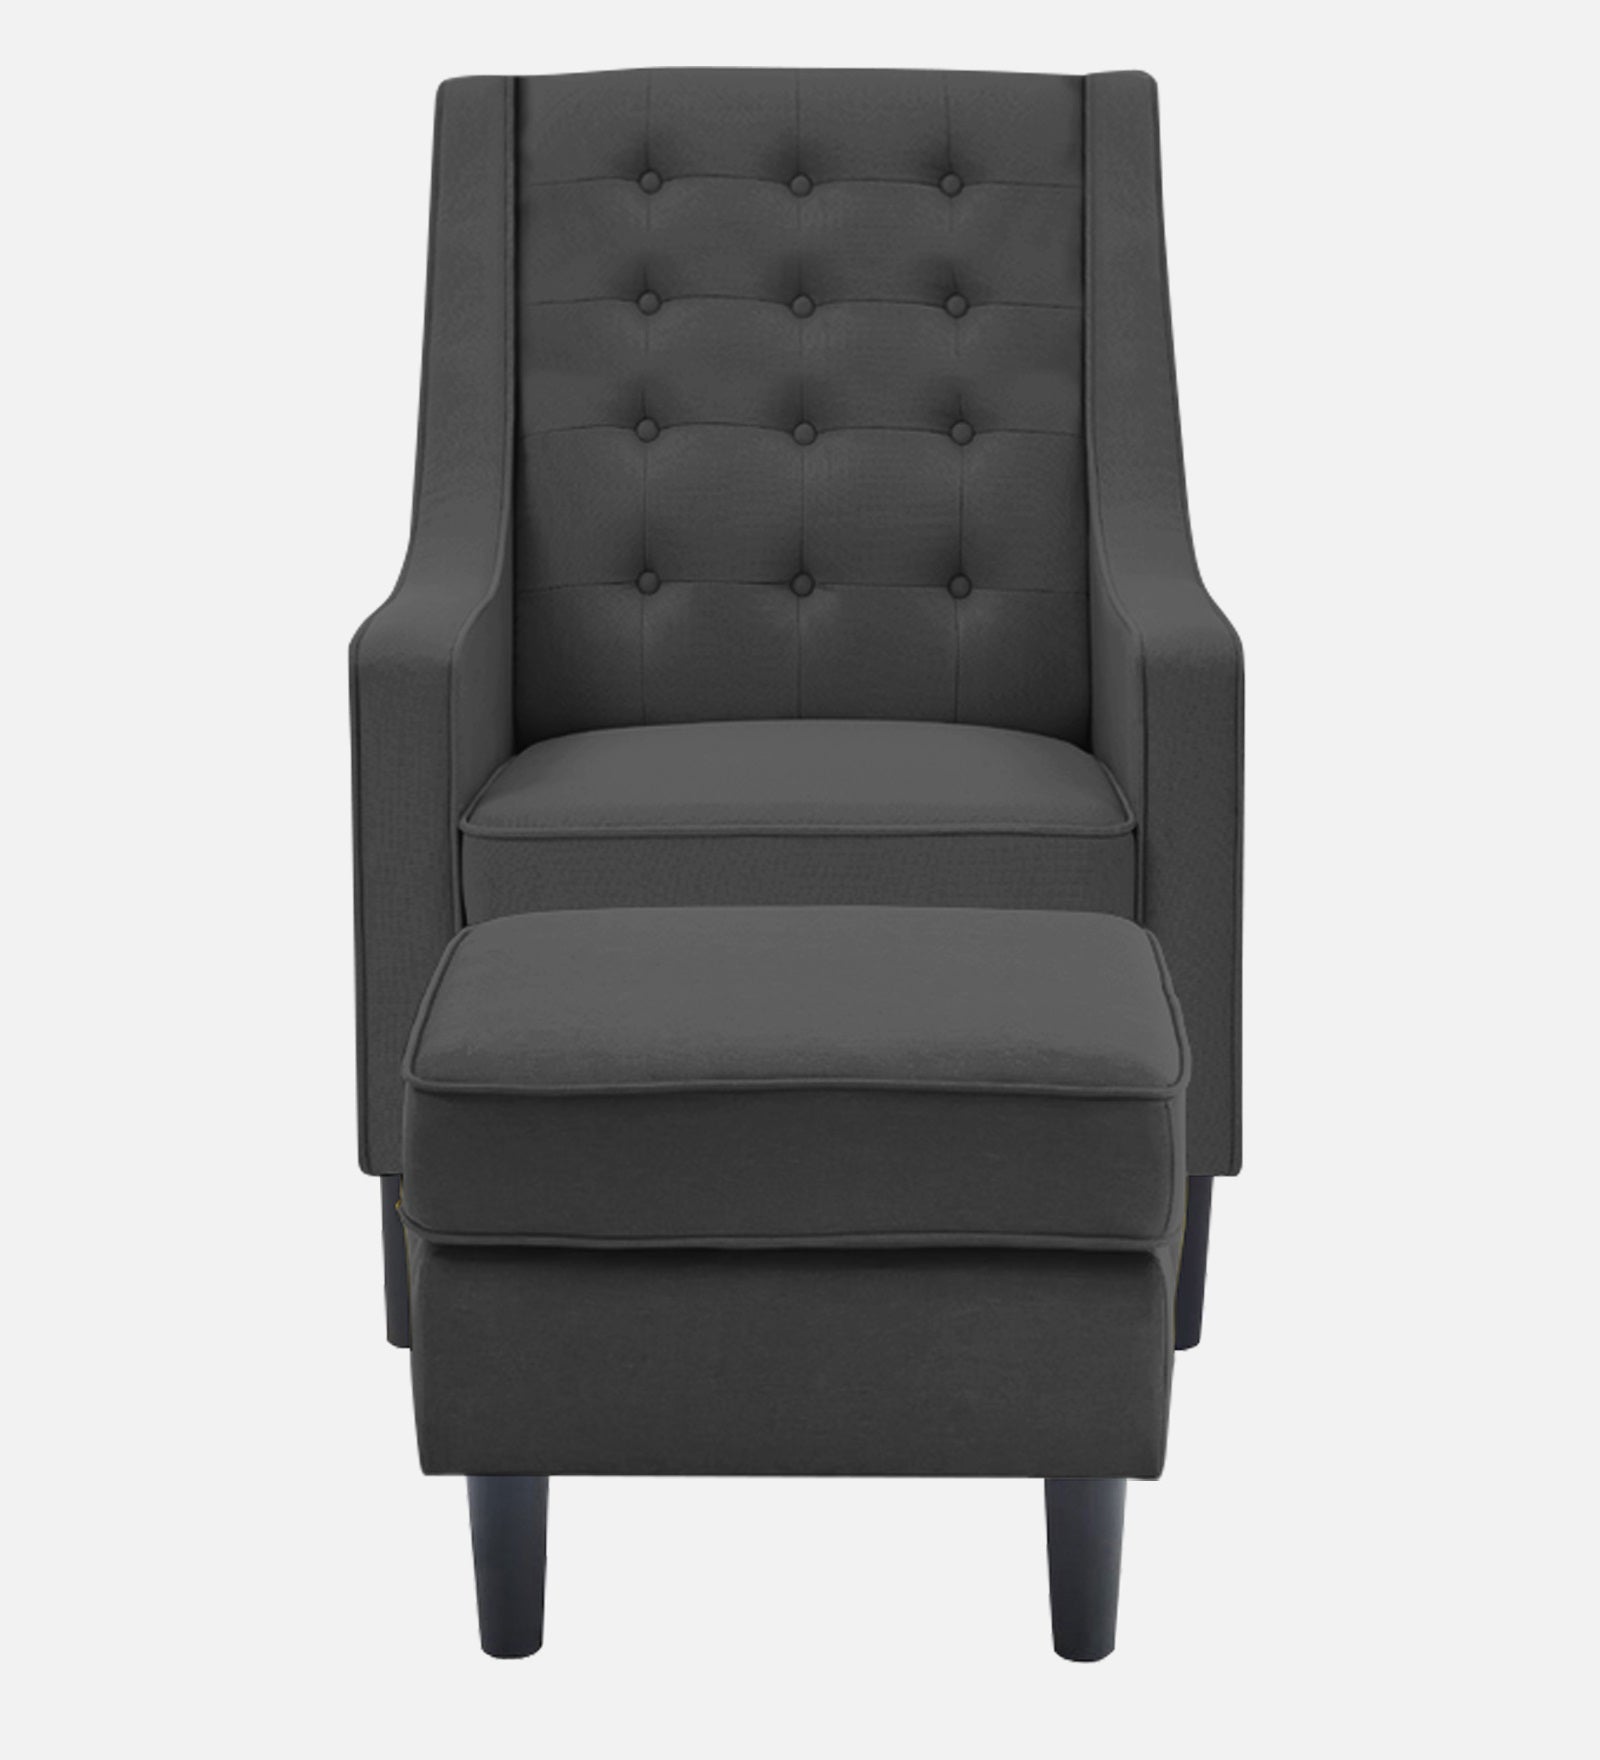 Sona Fabric Barrel Chair in Charcoal Grey Colour